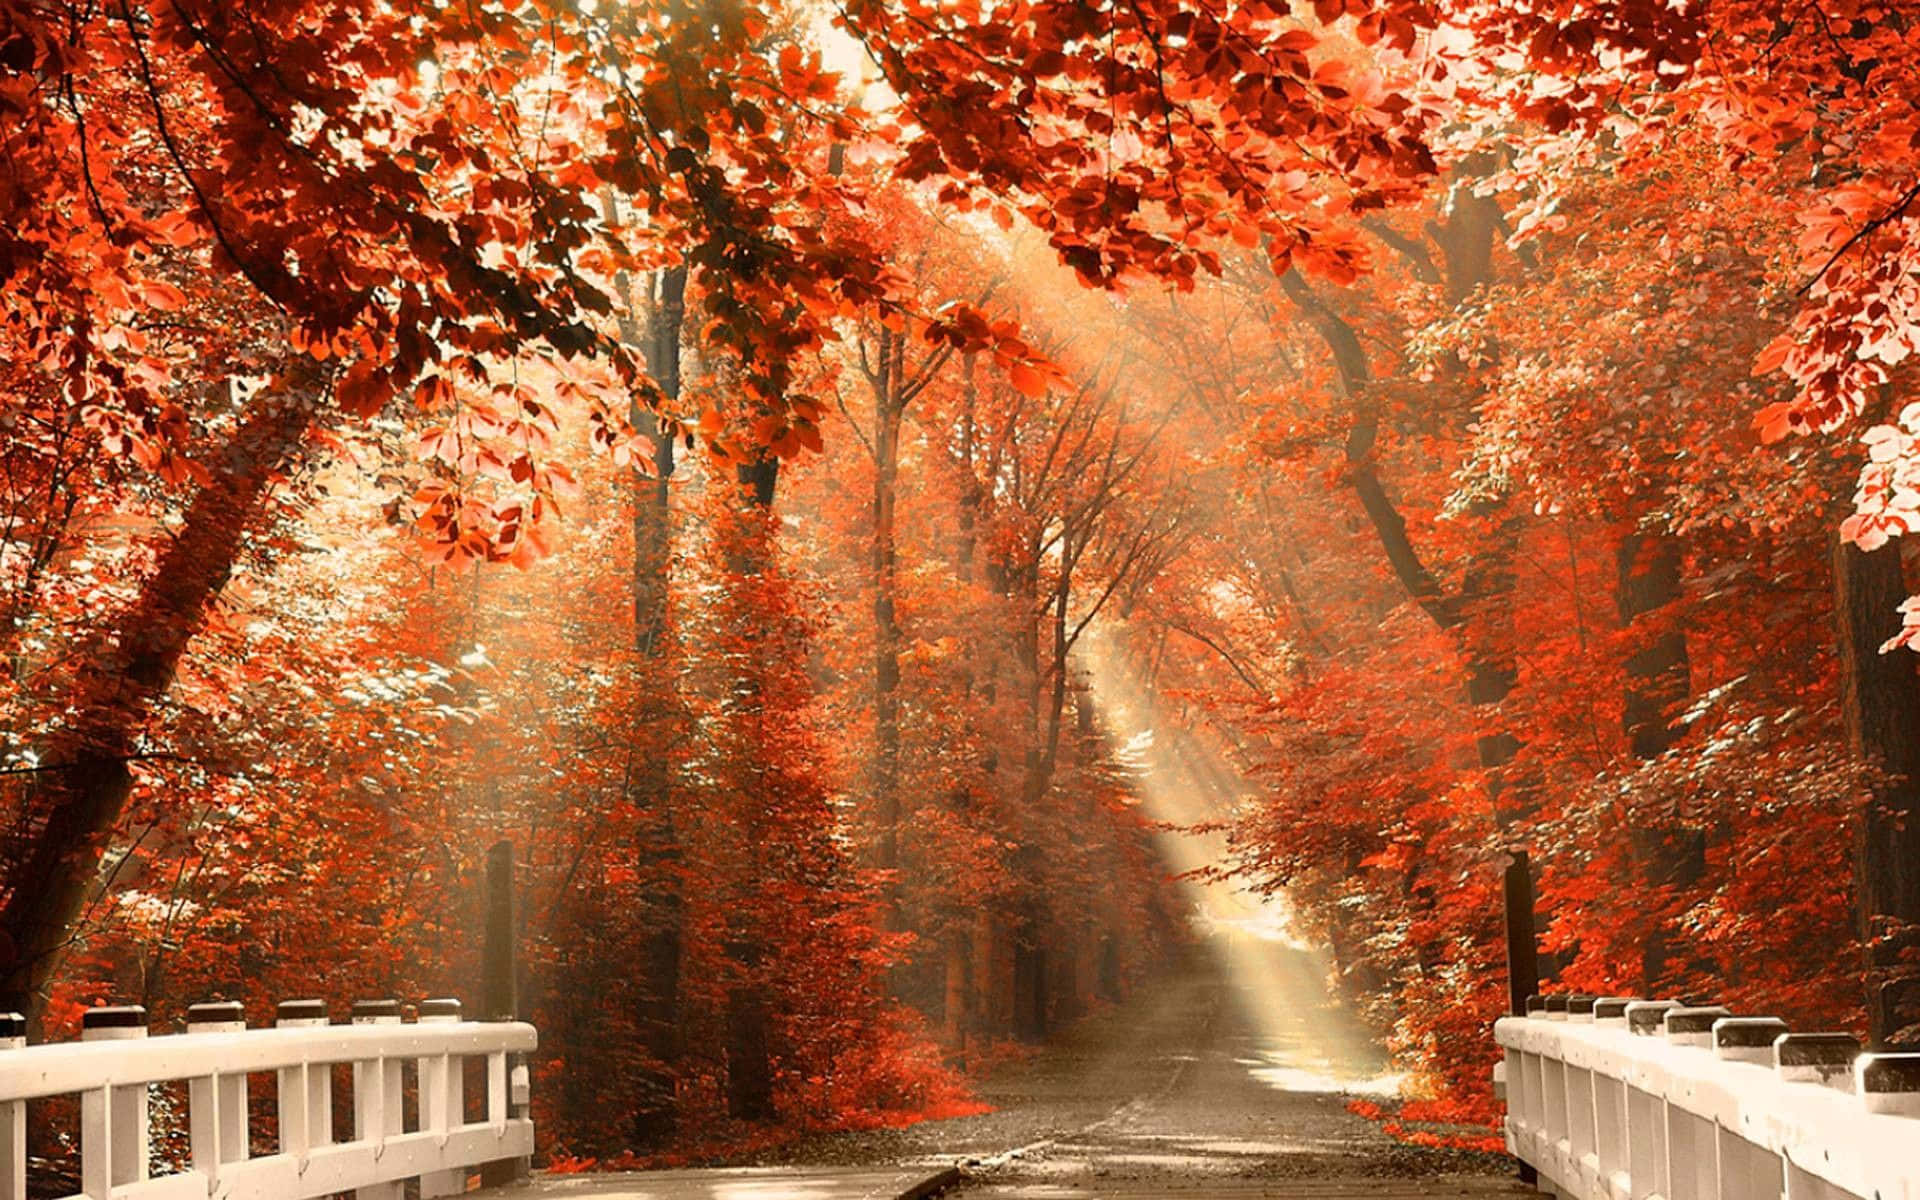 A Bridge In The Forest With Red Leaves